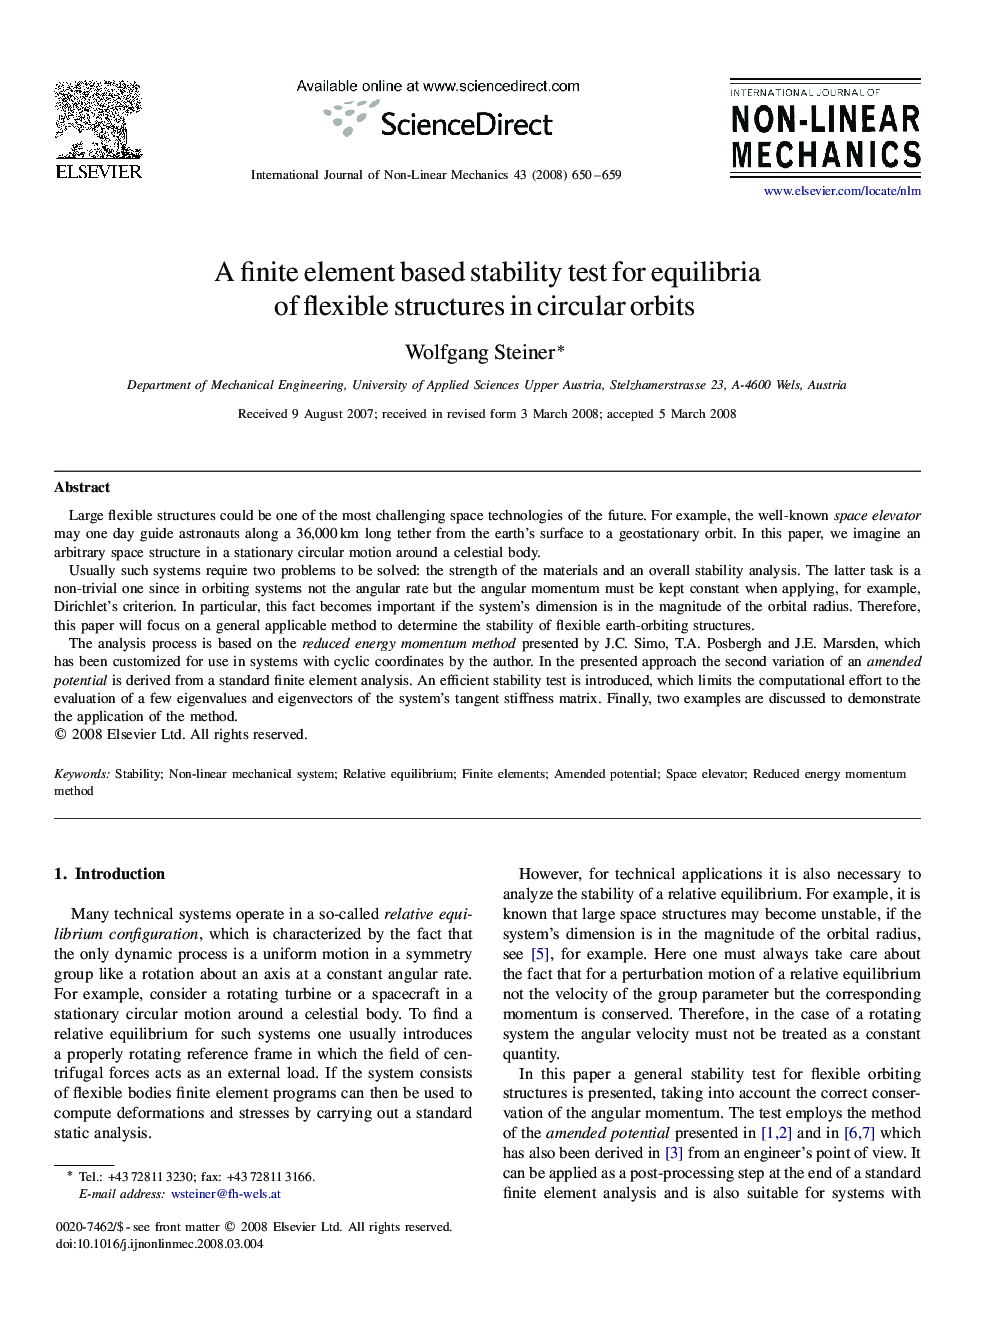 A finite element based stability test for equilibria of flexible structures in circular orbits